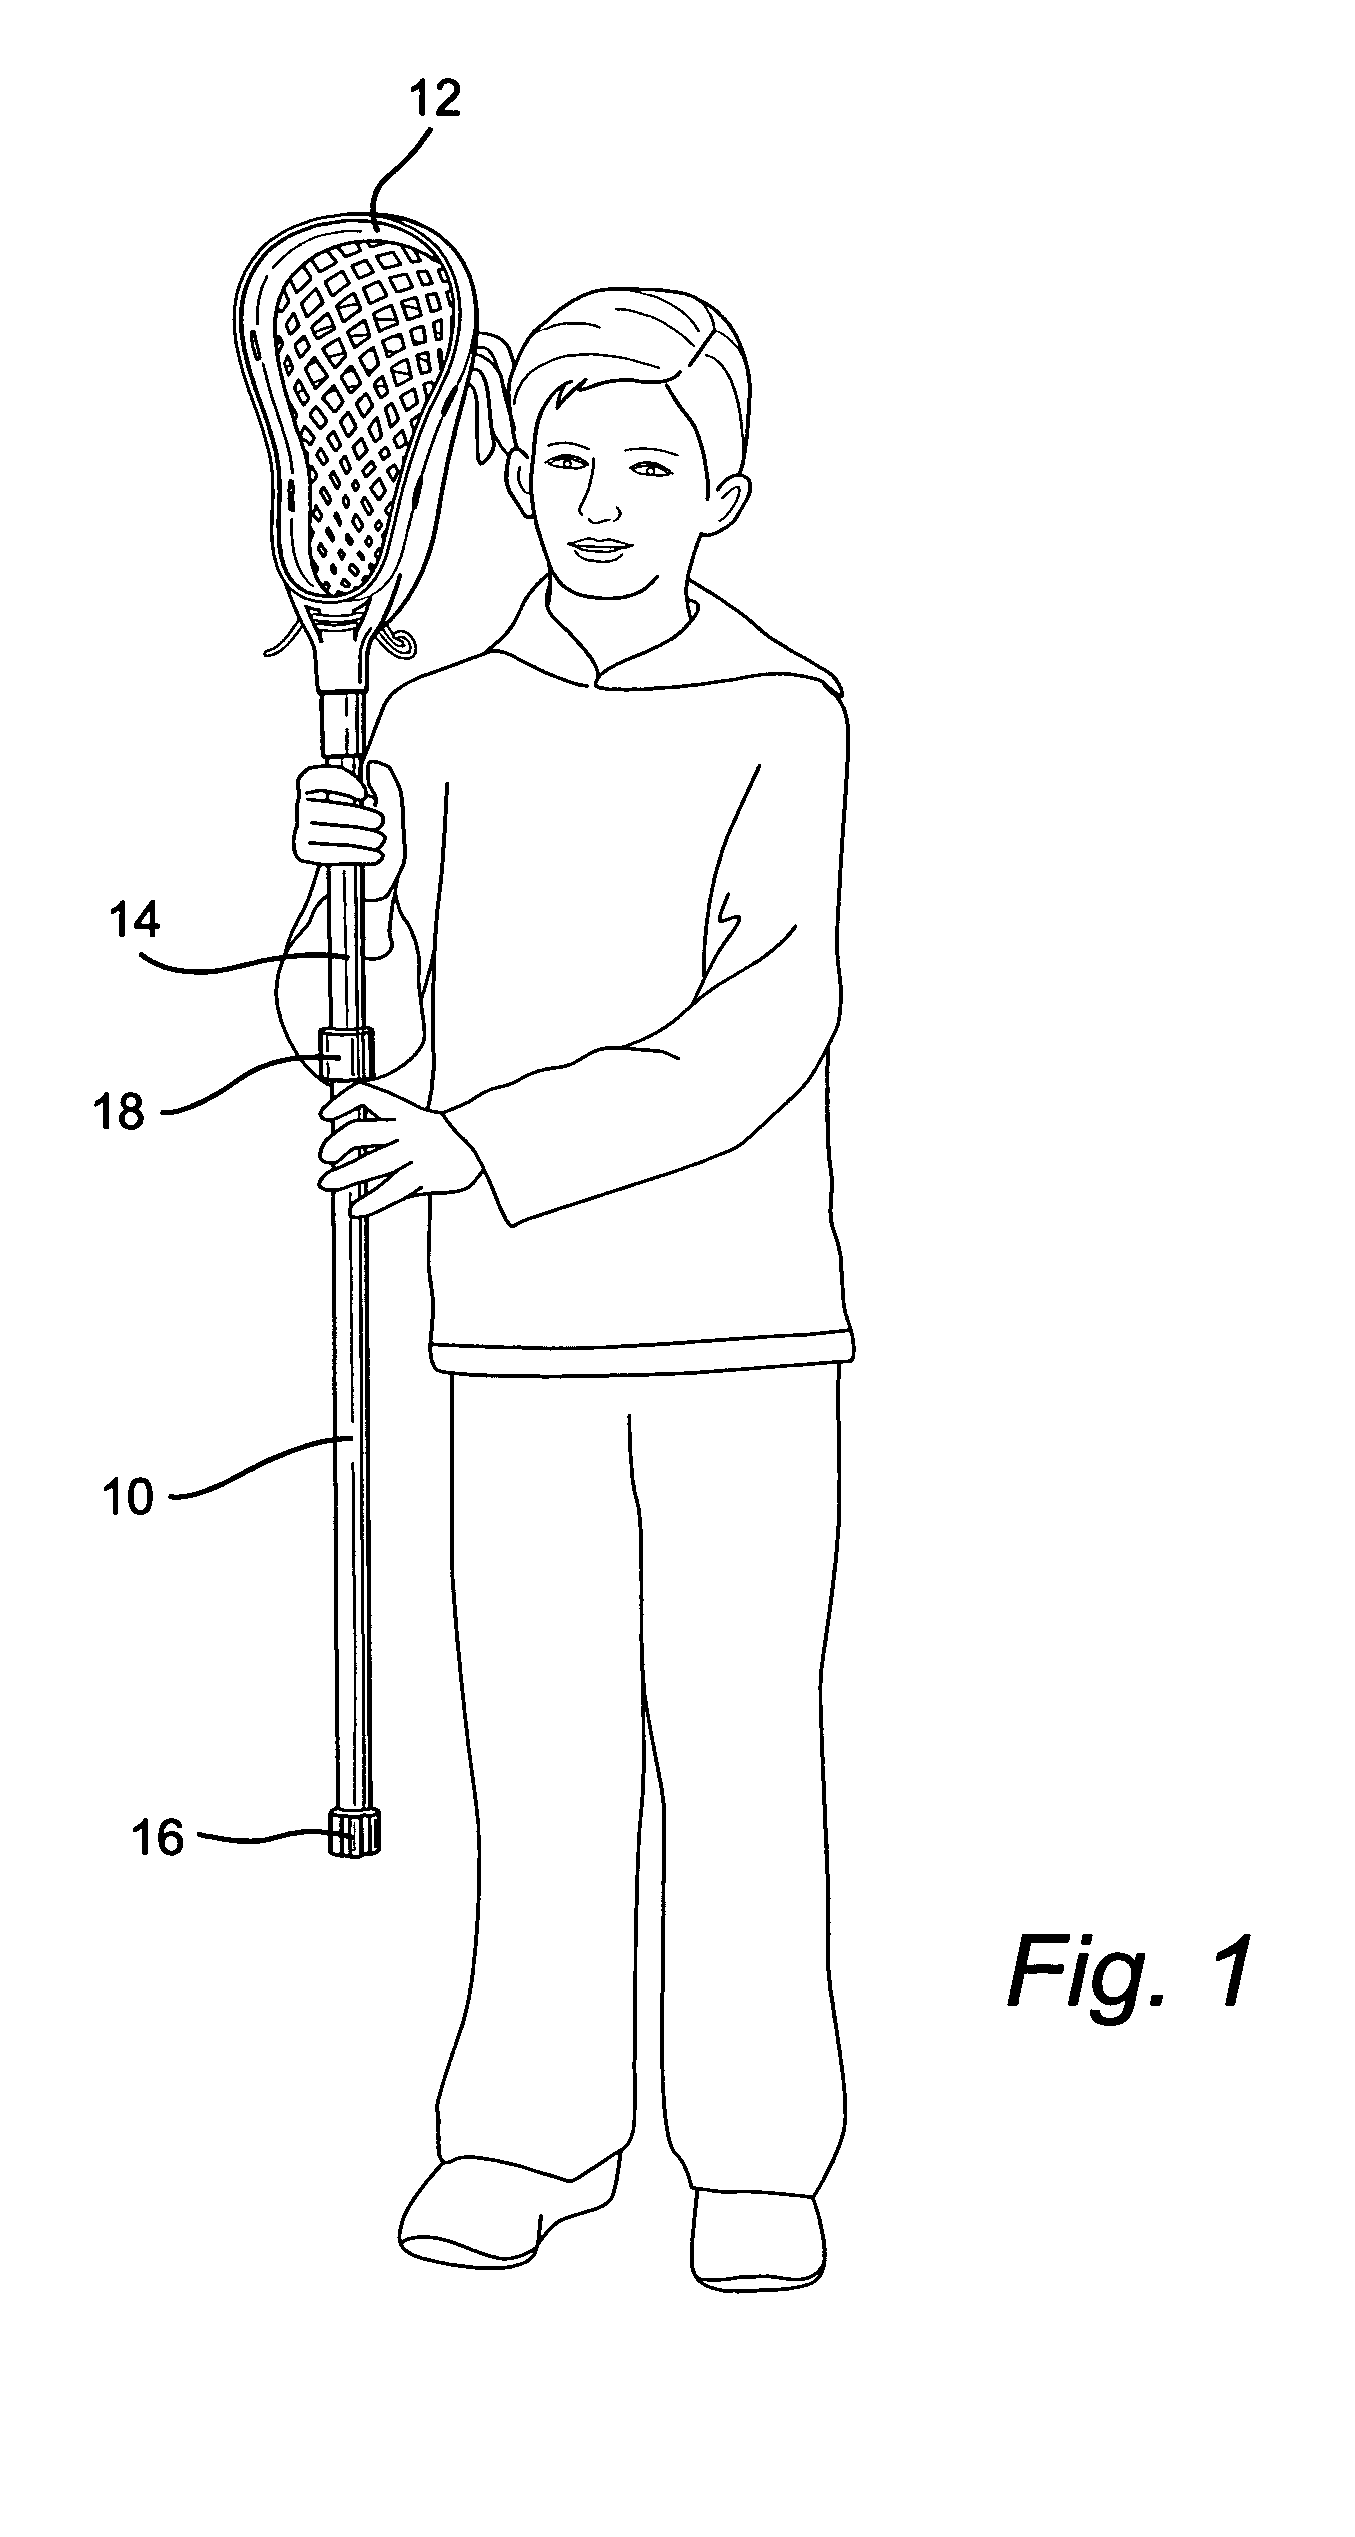 Design for lacrosse stick and method of using same